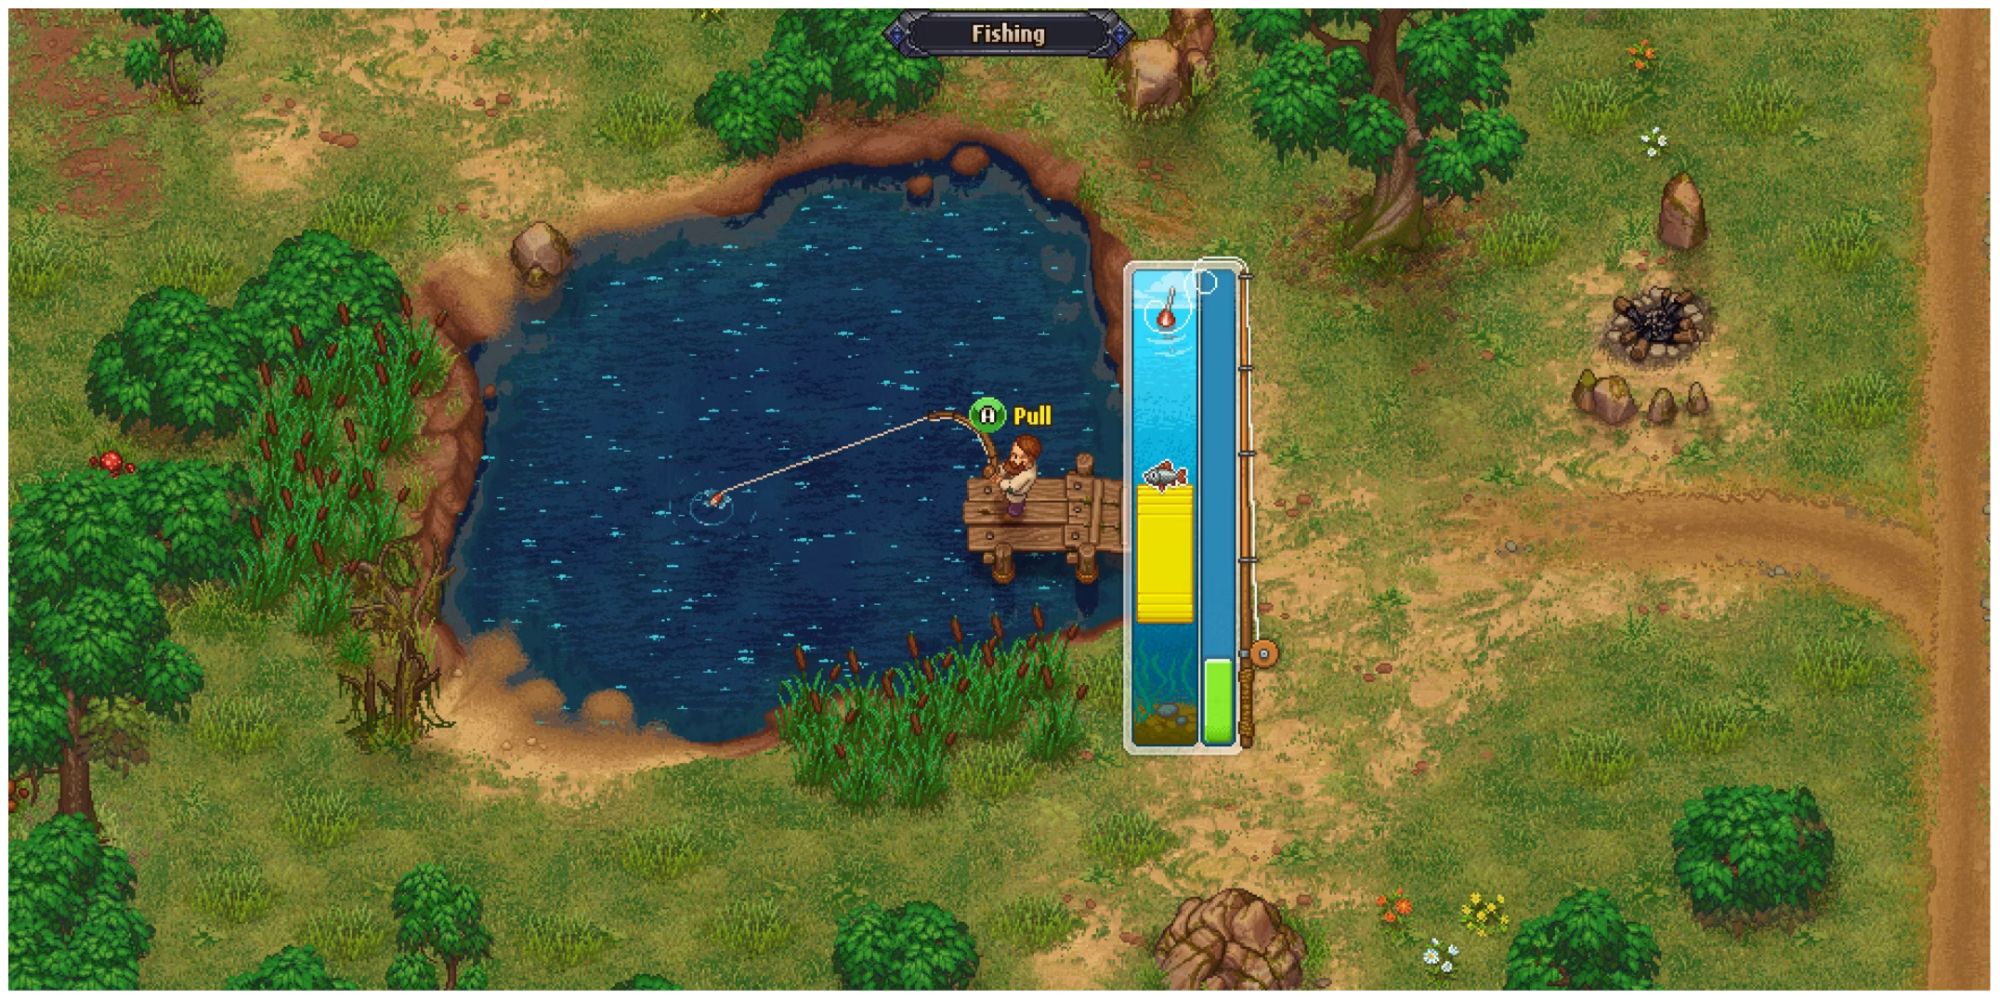 Graveyard Keeper fishing in the village pond